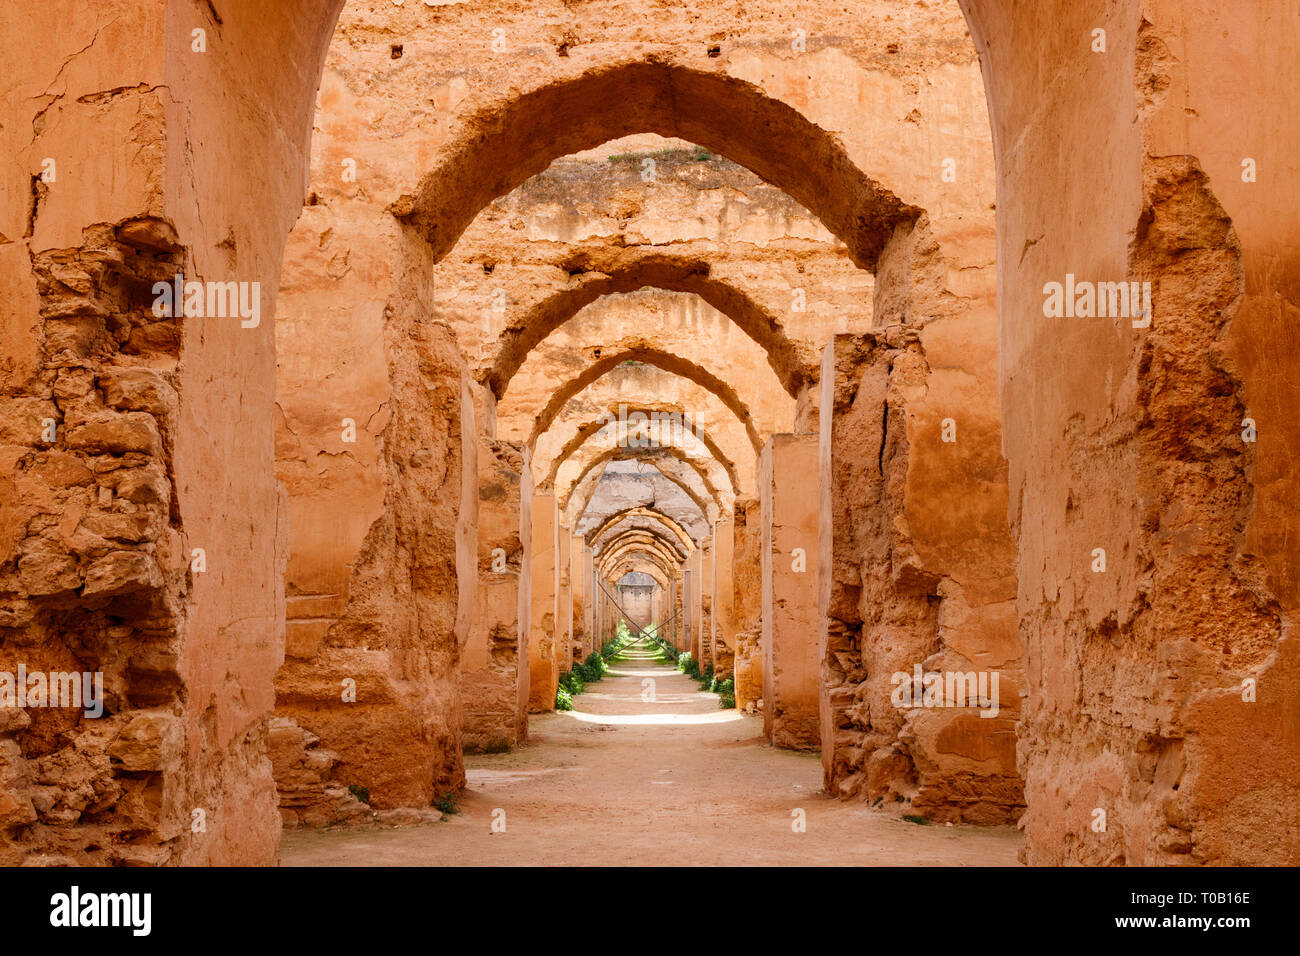 Arches and walls of Heri es-Souani stable and granary, commisioned by the sultan Mulai Ismail, Meknes, Morocco. Stock Photo